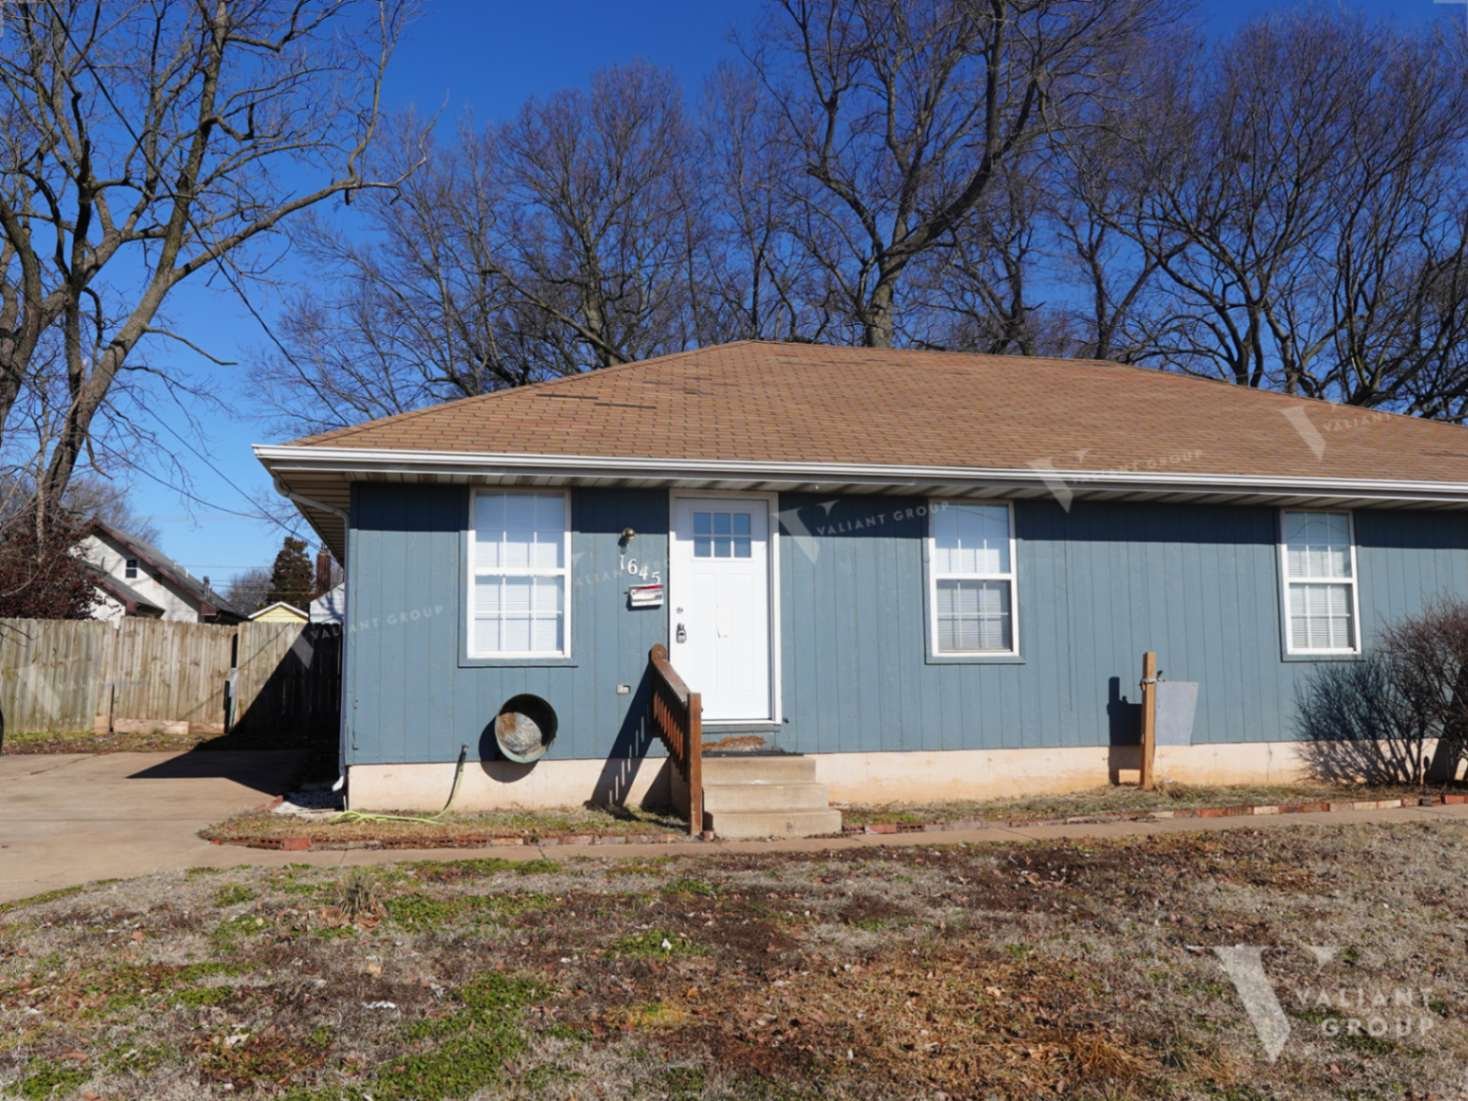 Duplex For Lease Springfield MO - 1645 E Chestnut - Exterior Front.jpg